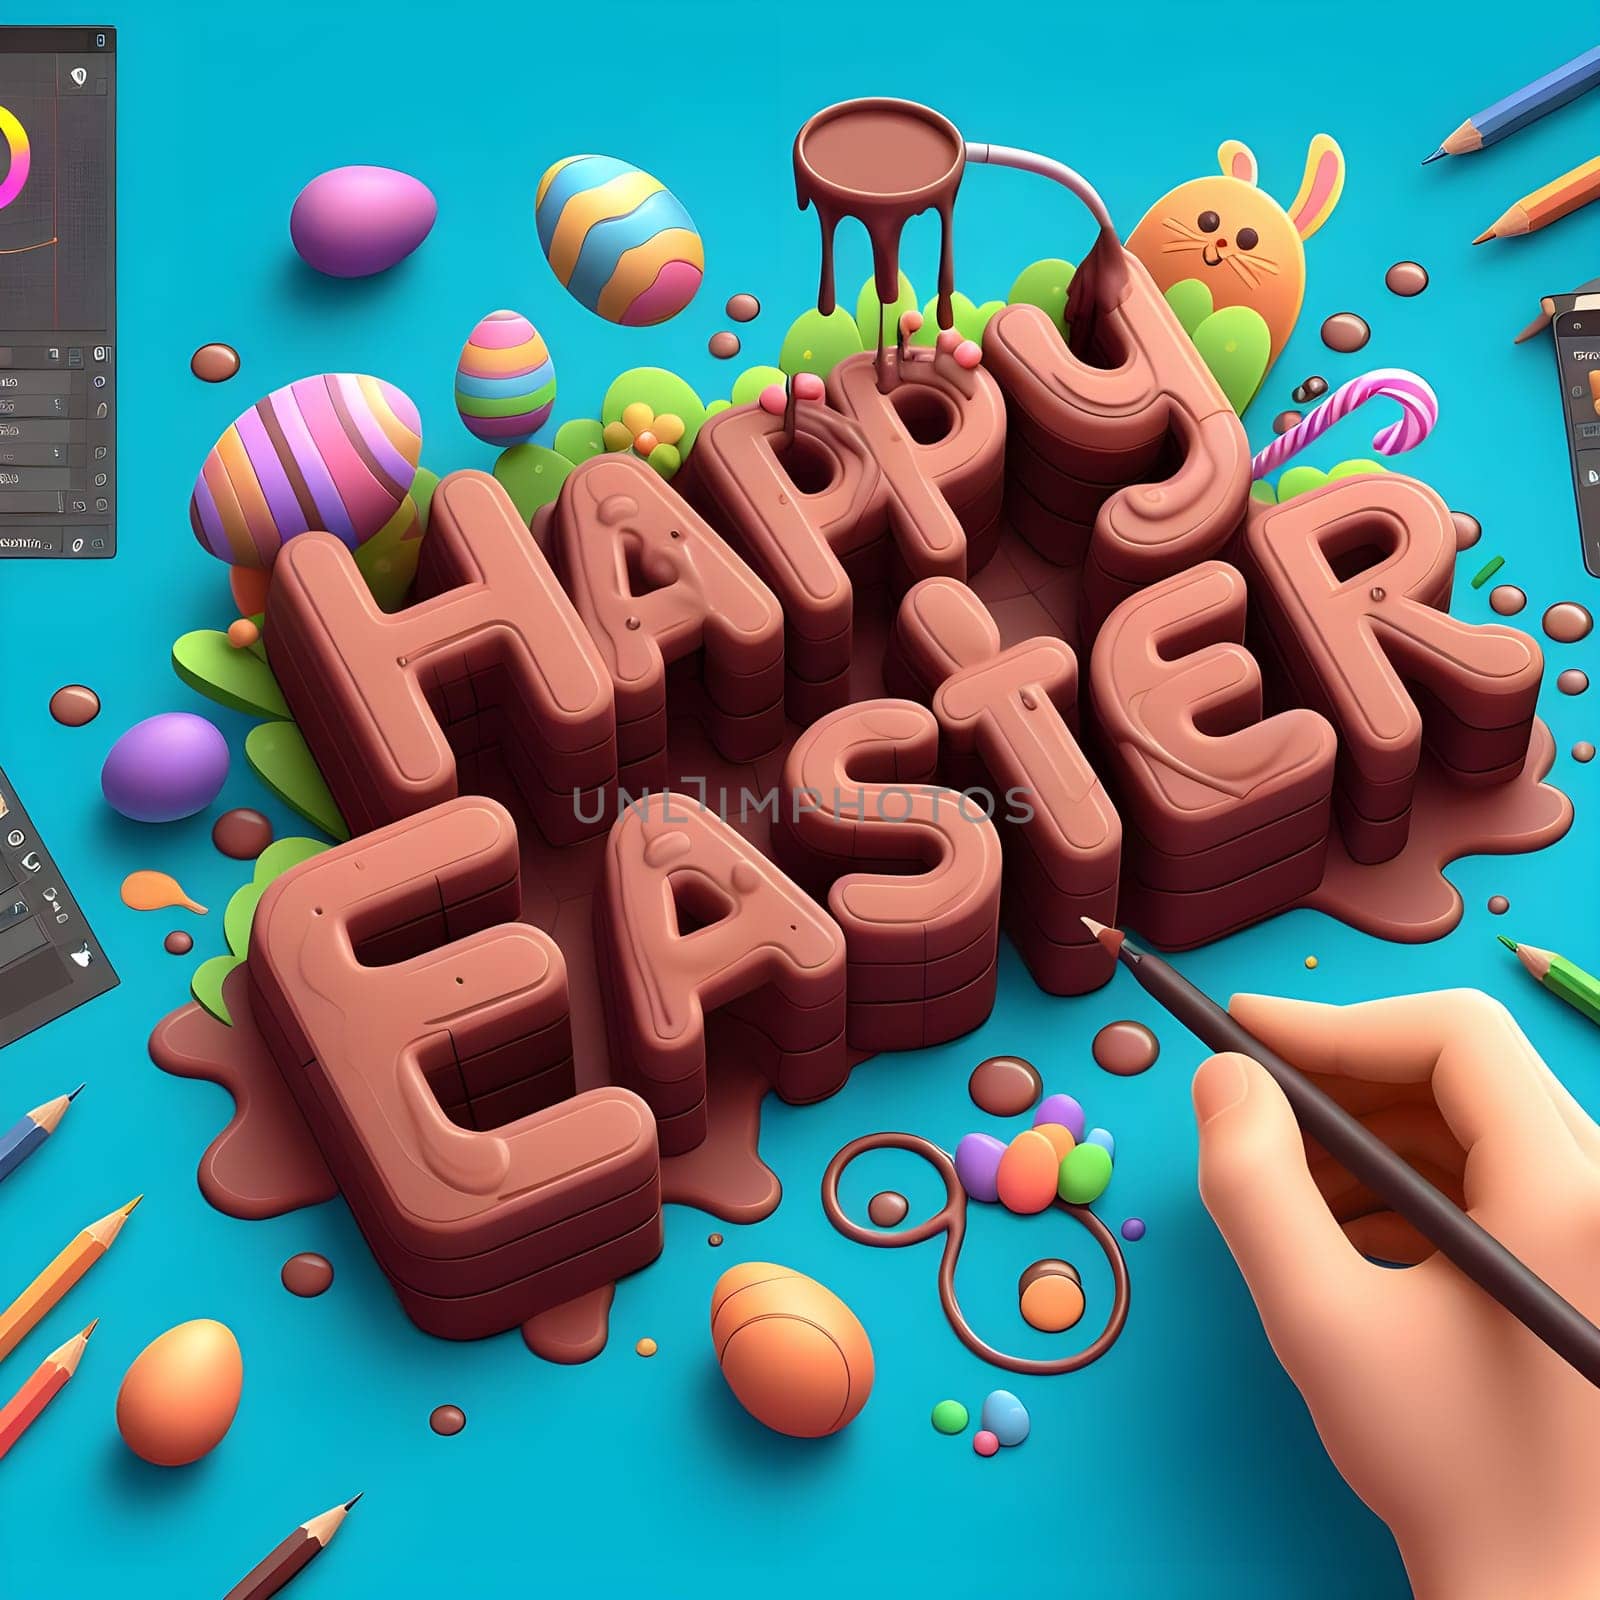 Happy Easter 3D text effect - cartoon style 3D premium . High quality photo